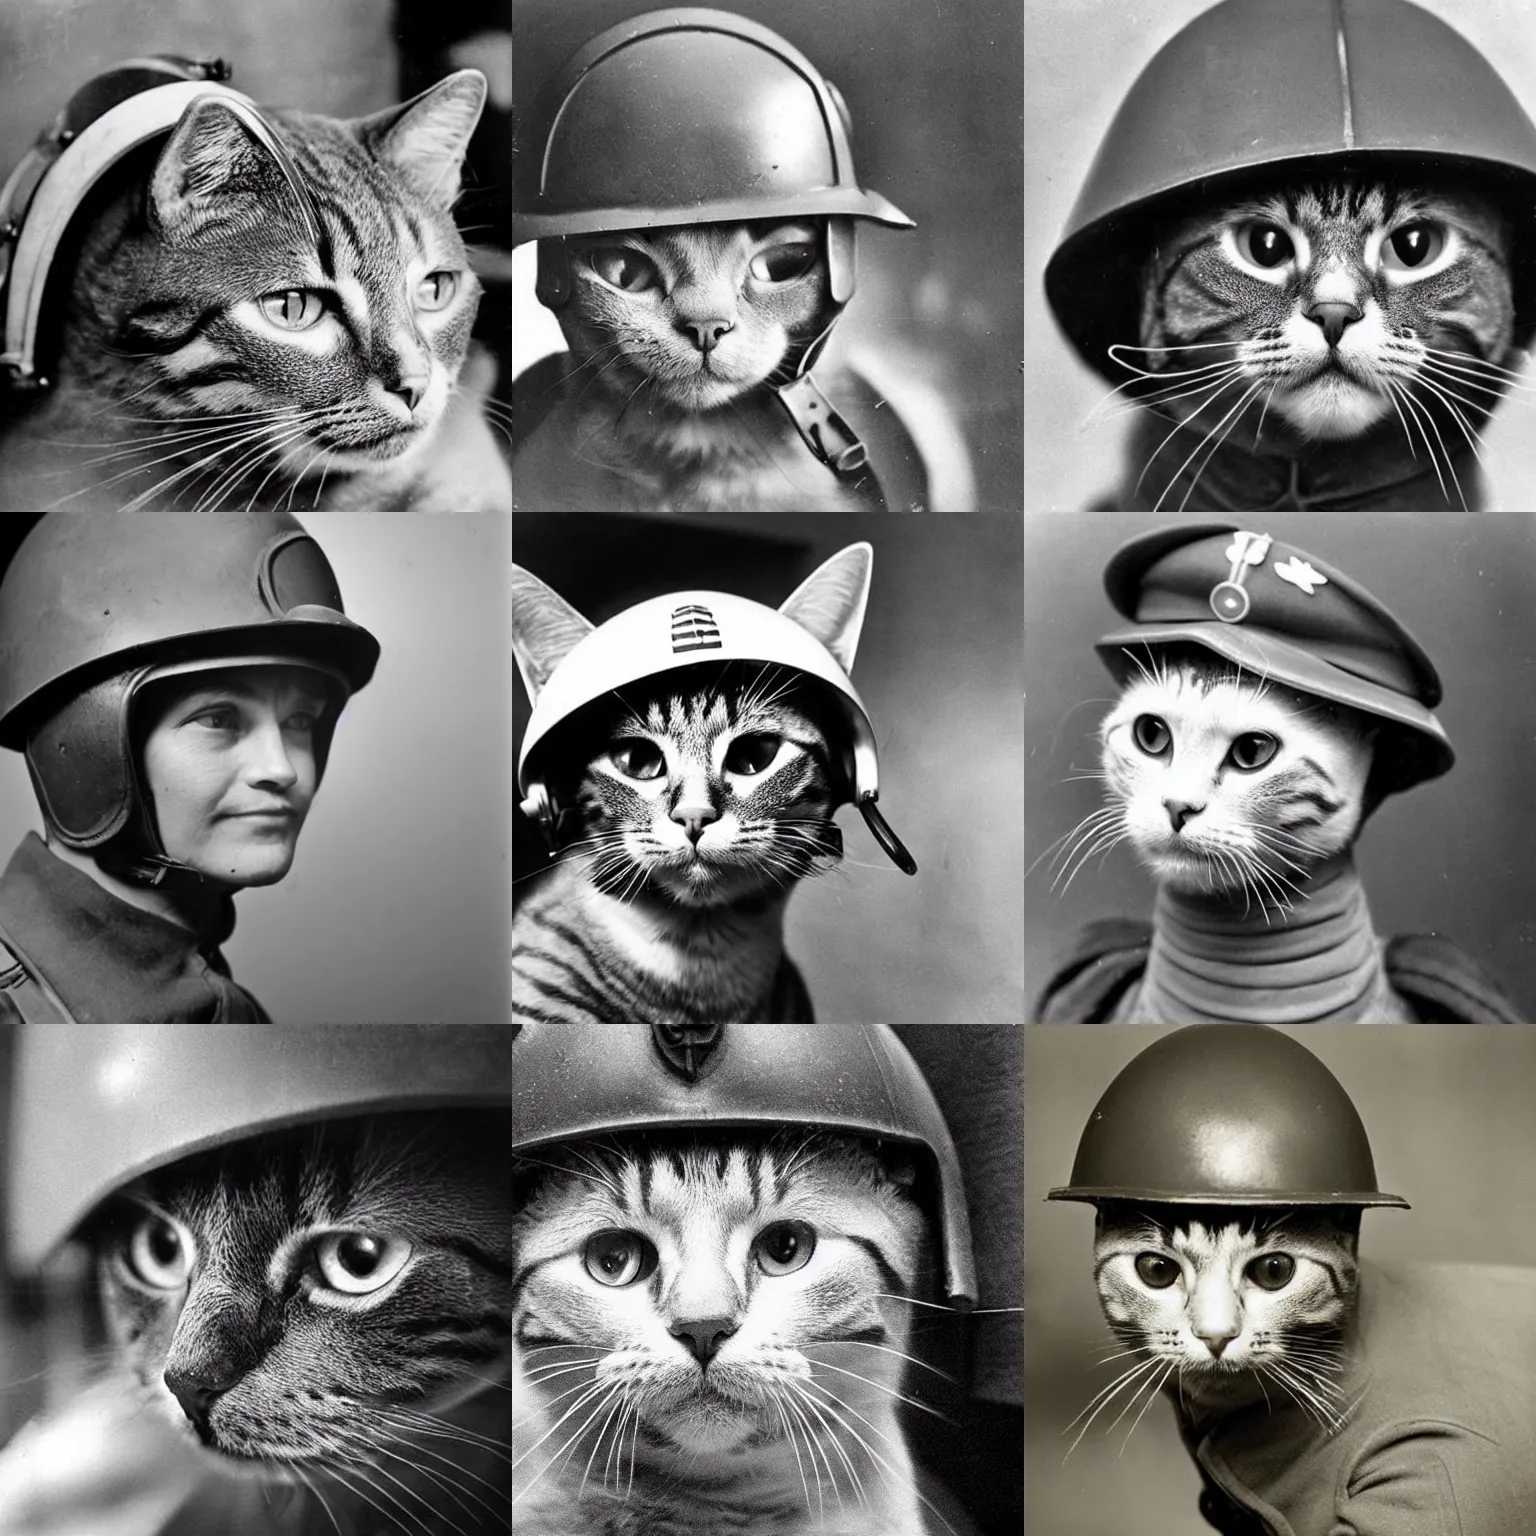 Prompt: Close up of a cat wearing soldier helmet in the battle, ww2 historical photography, black and white